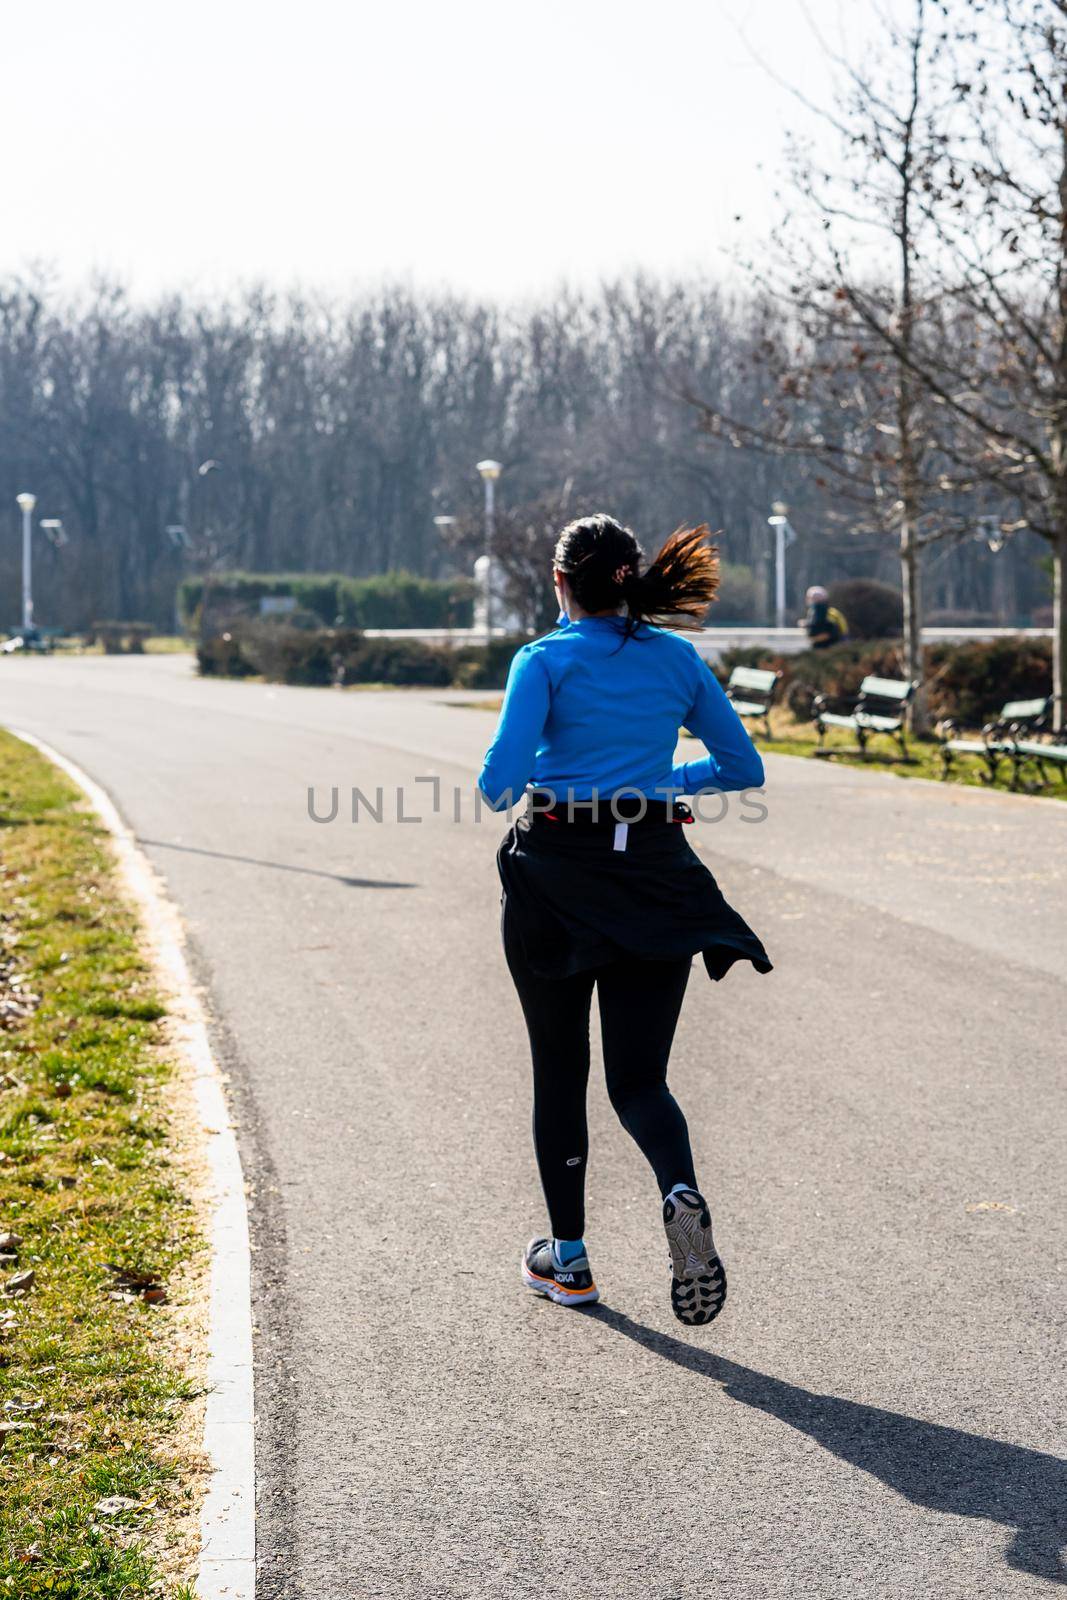 Jogging, running in the city park. Healthy lifestyle, outdoor physical activity and fitness concept in Bucharest, Romania, 2021